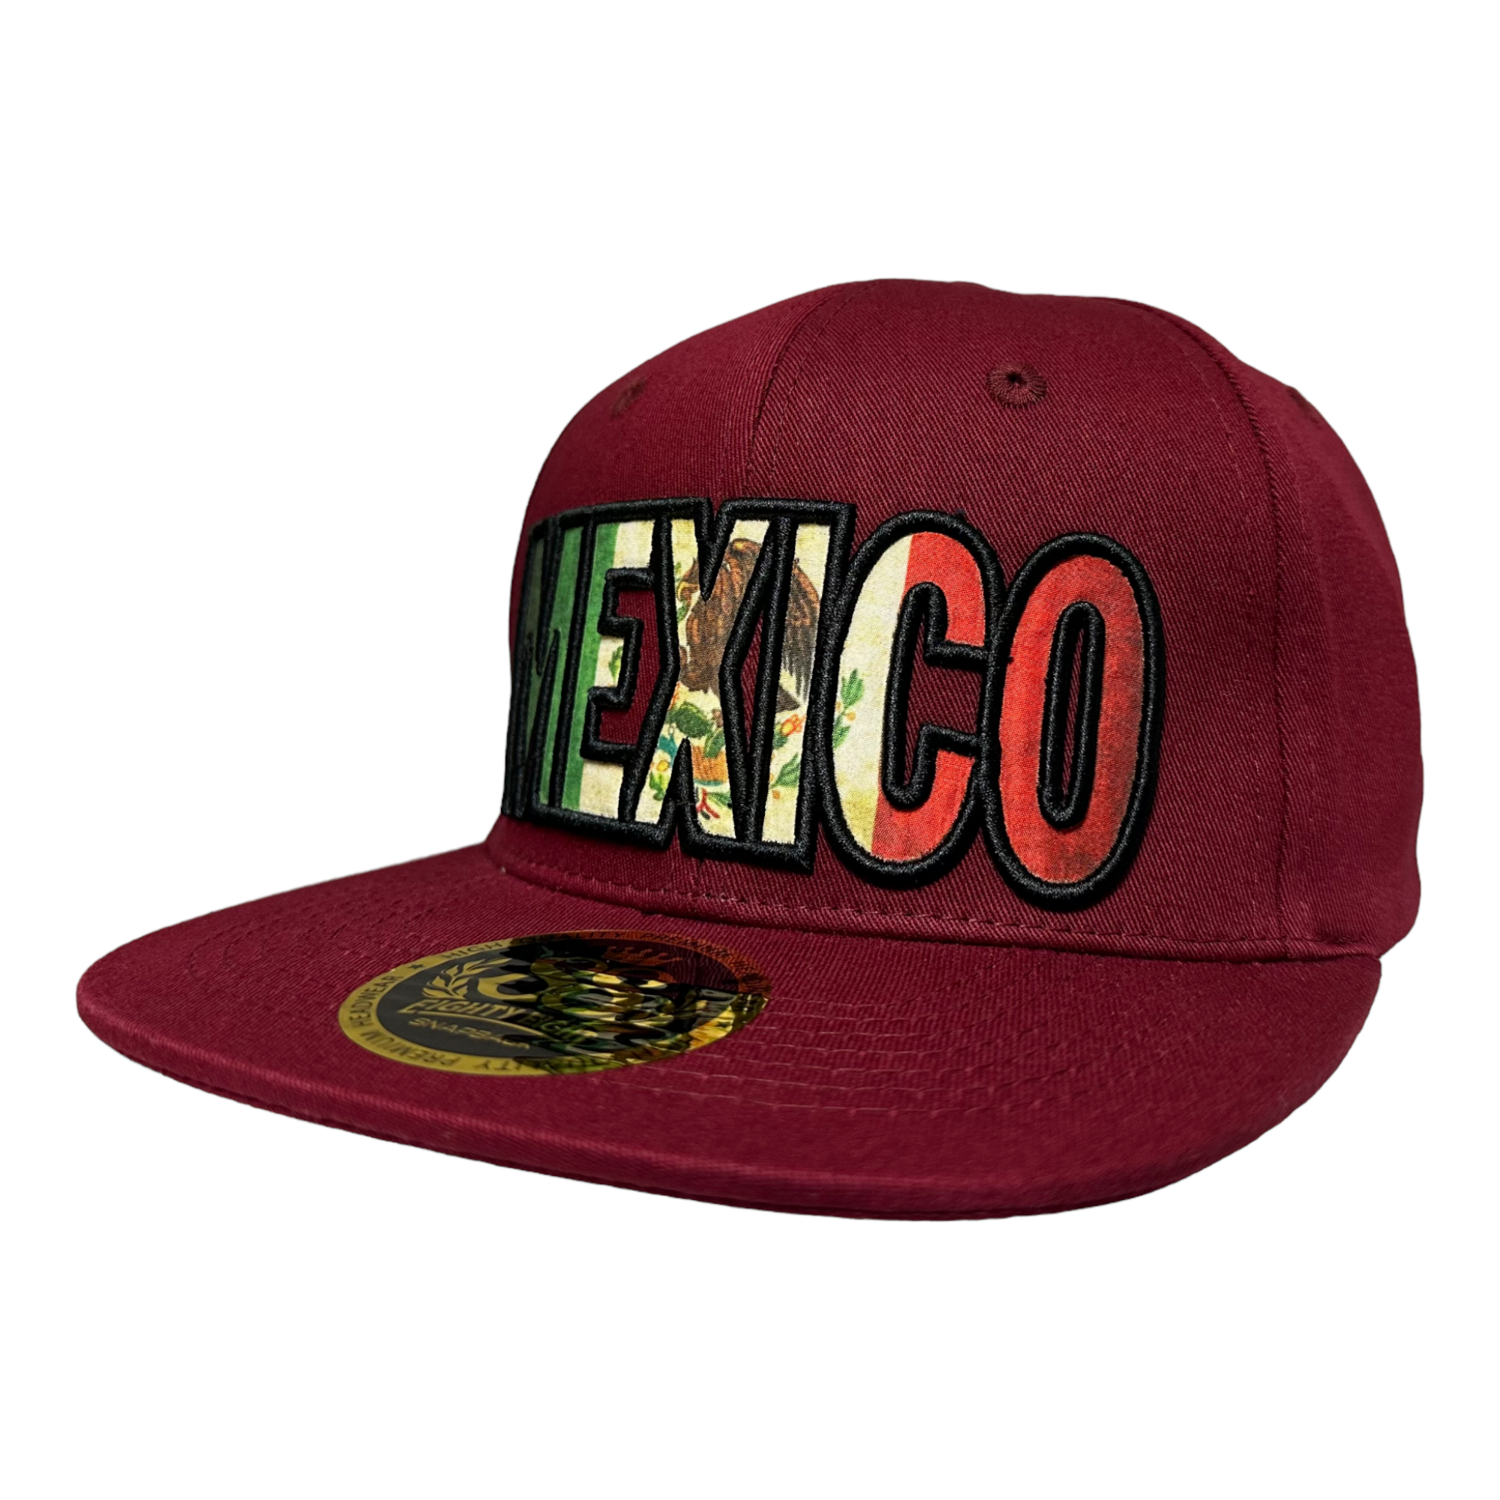 Mexico Embroidered Flag Design Snapback Hat